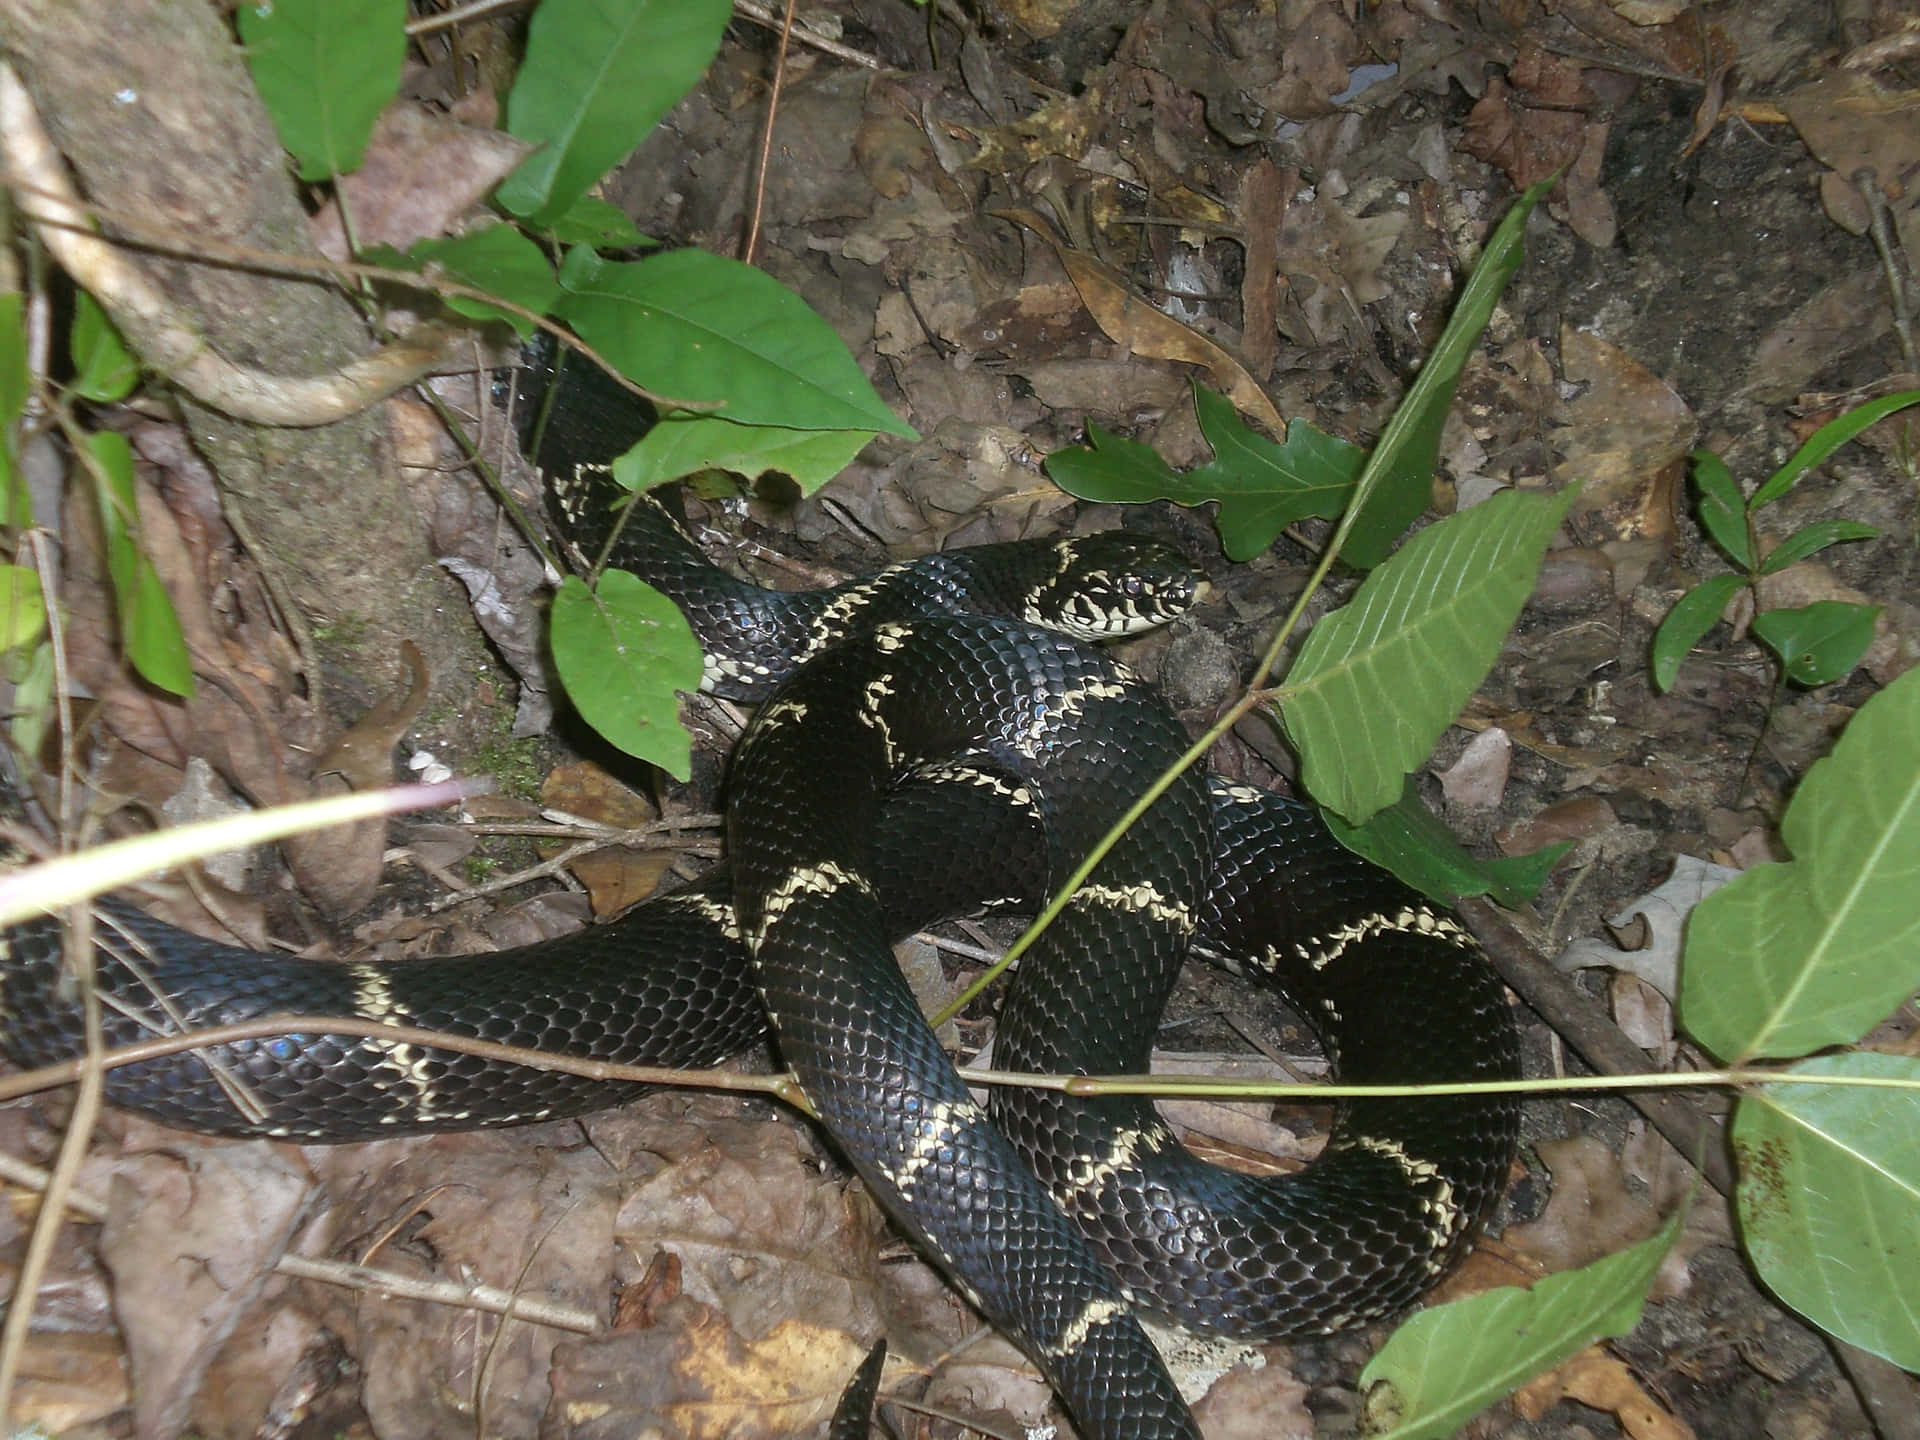 A vibrant and colorful king snake with distinctive yellow markings